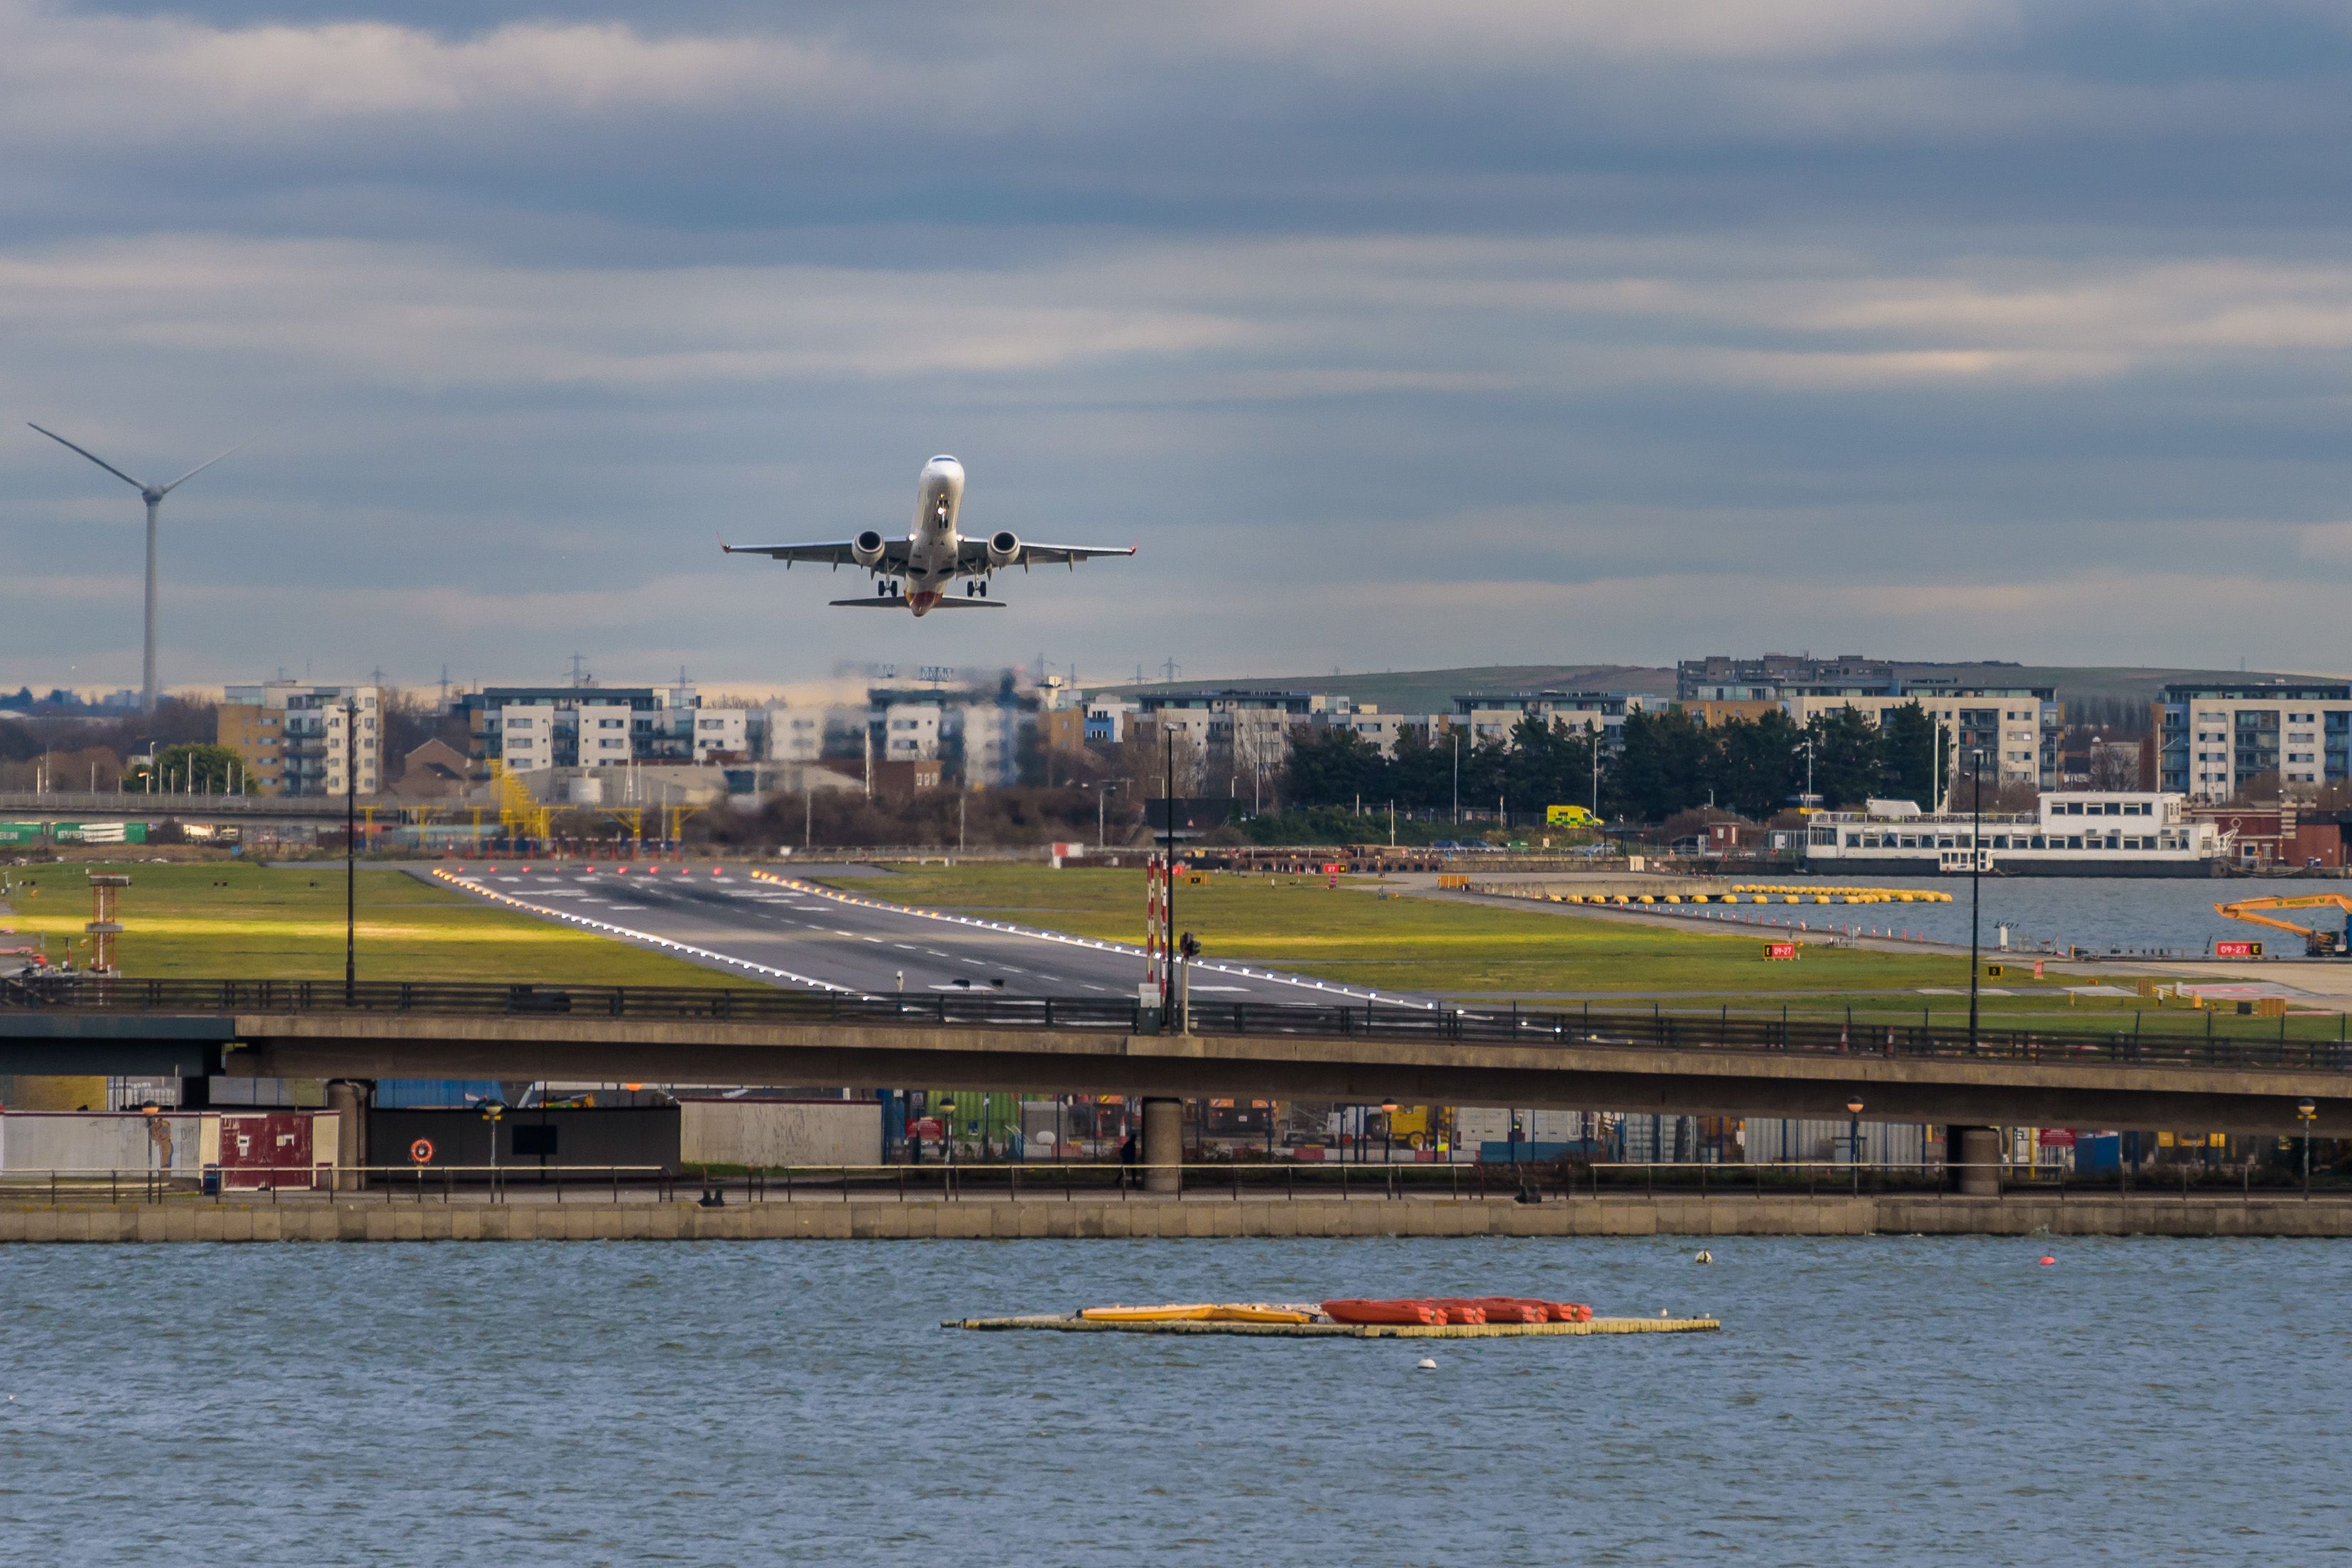 Embraer E190 Departing From London City Airport